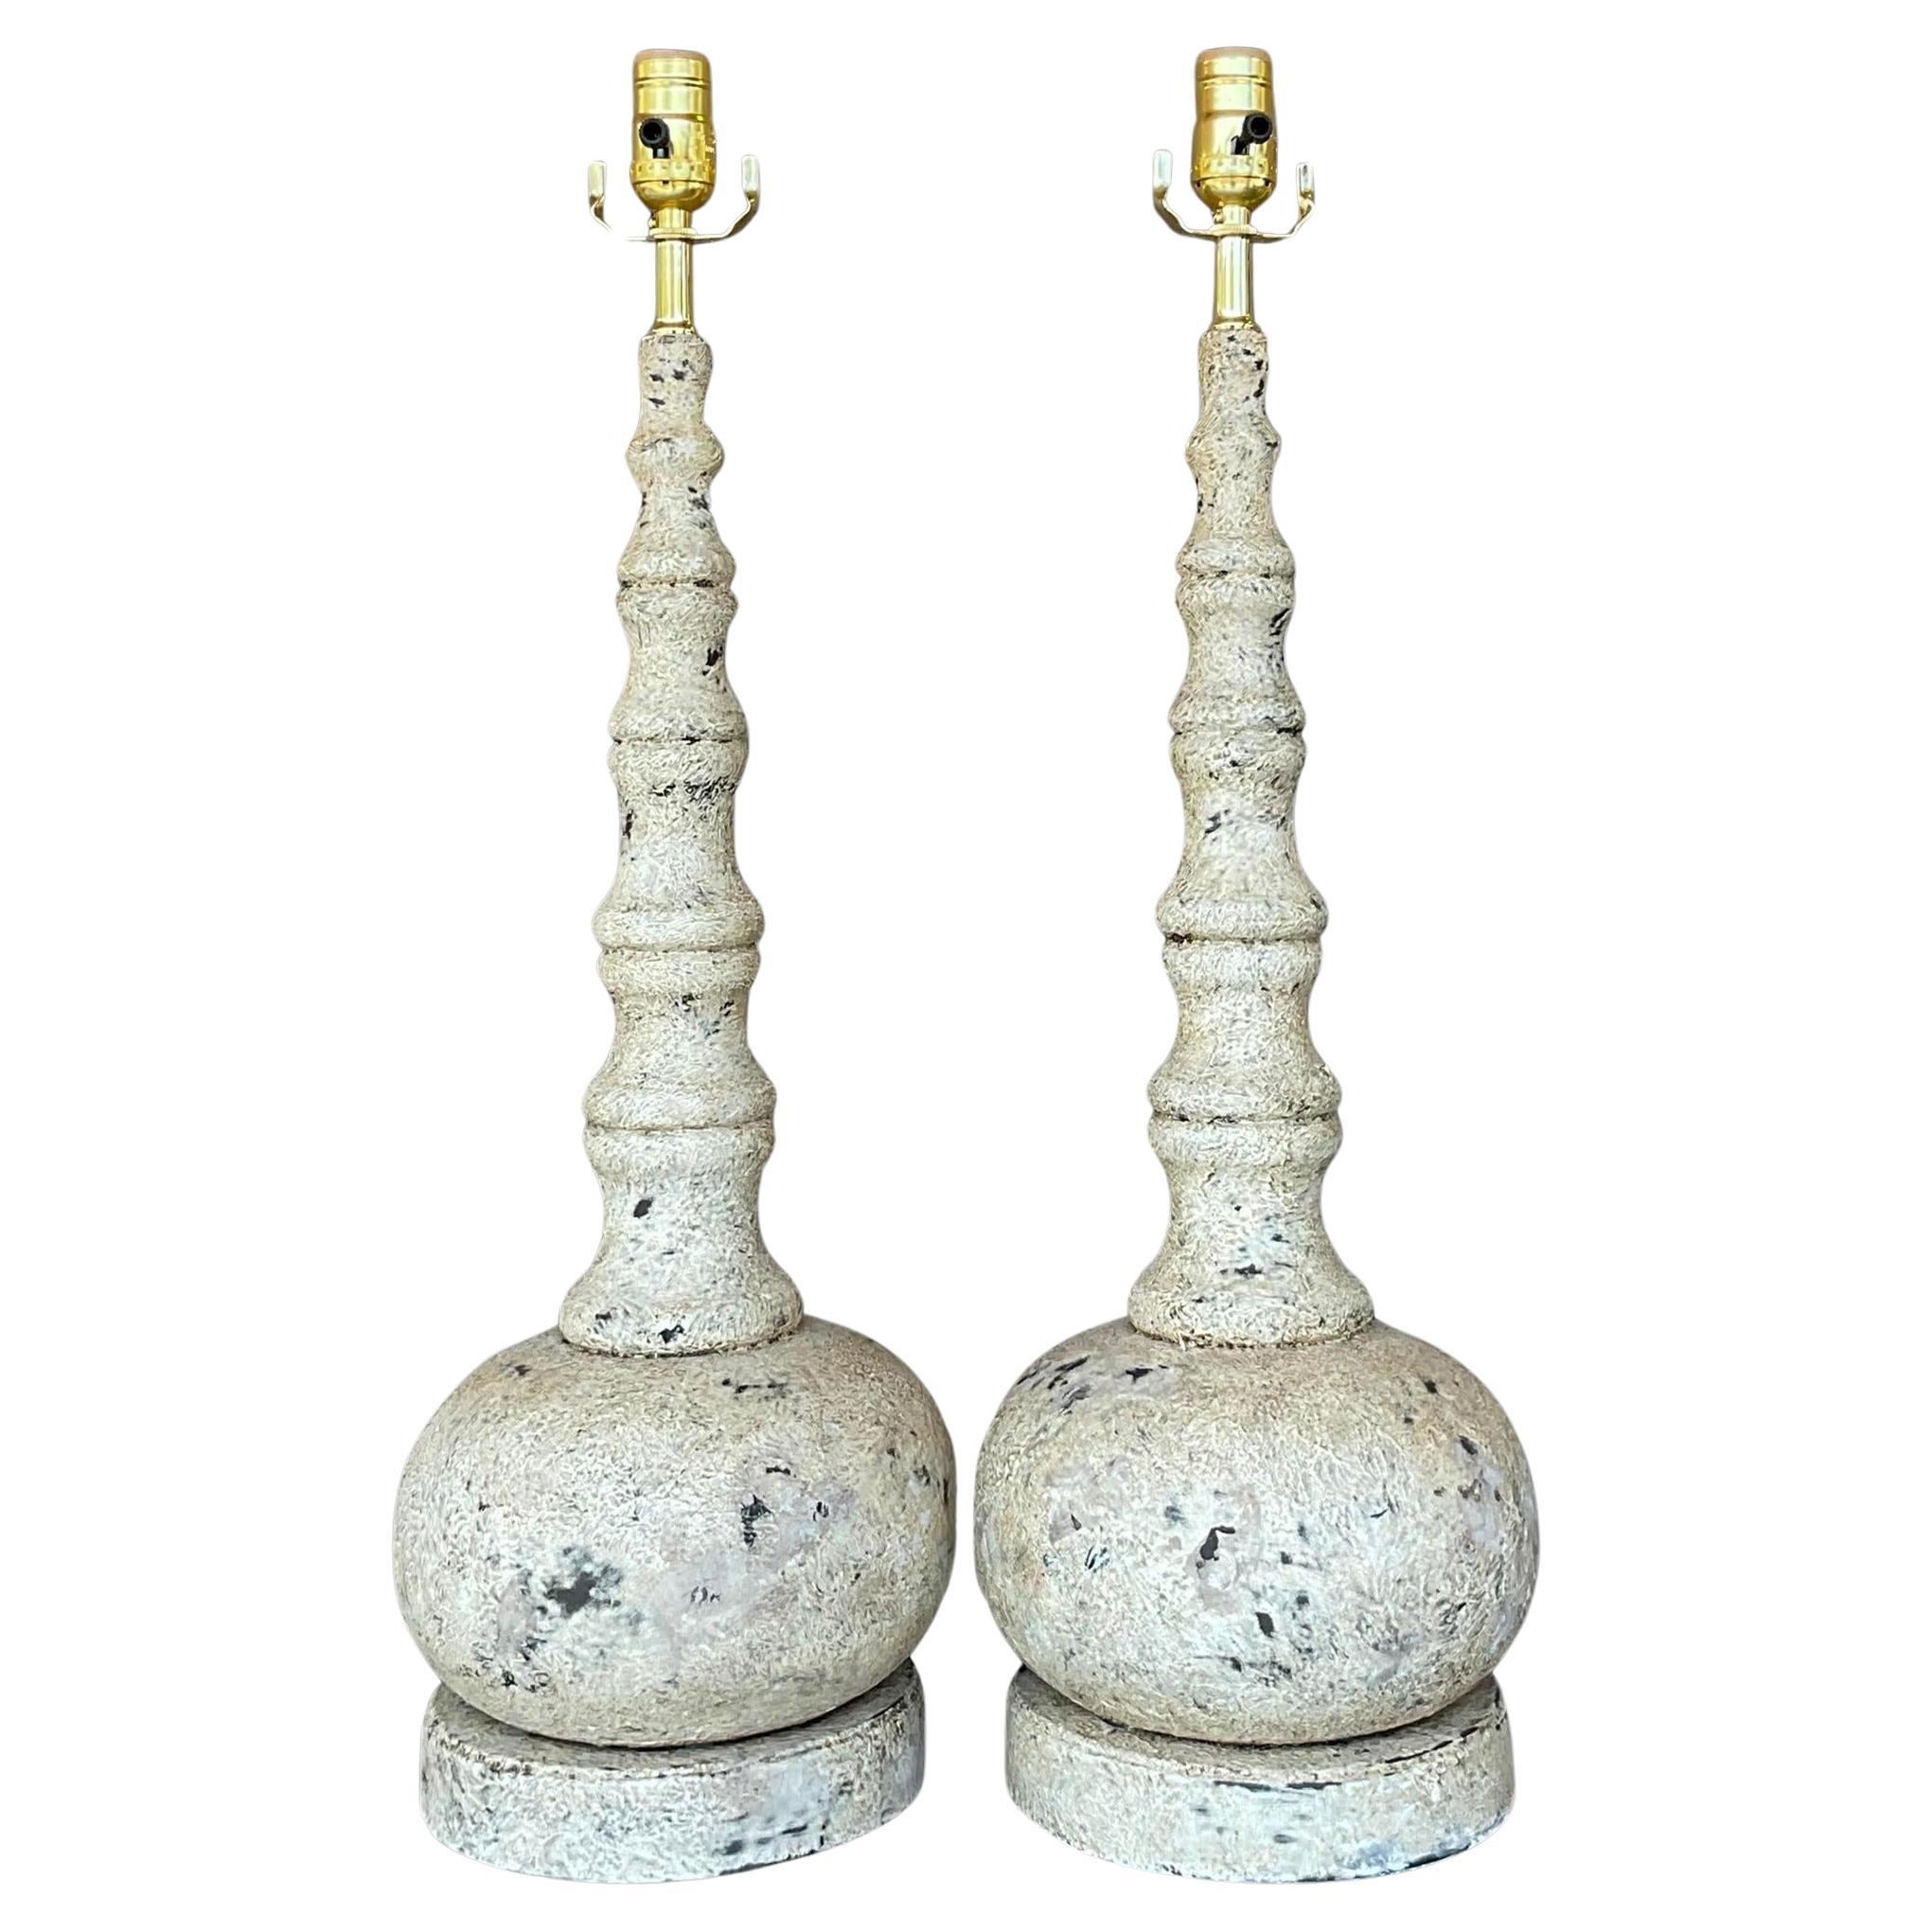 Vintage Boho Patinated Long Neck Lamps - a Pair For Sale